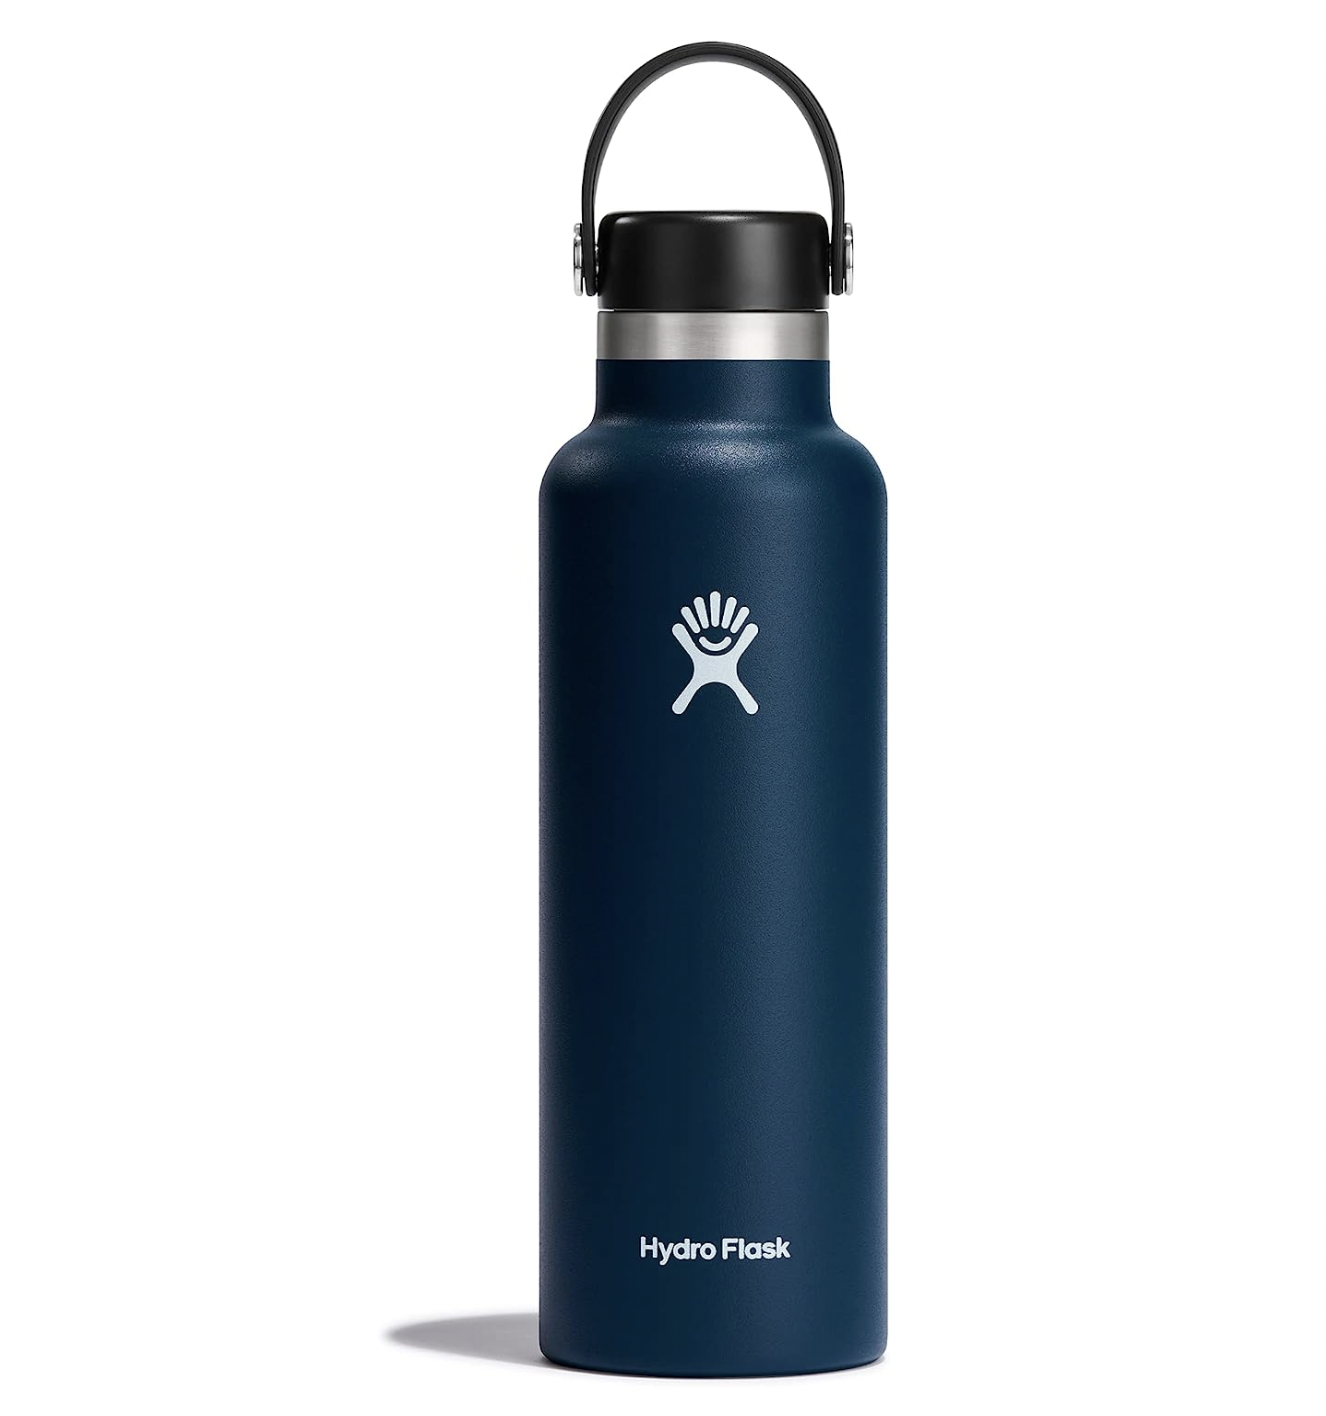 Hydro Flask Stainless Steel Water